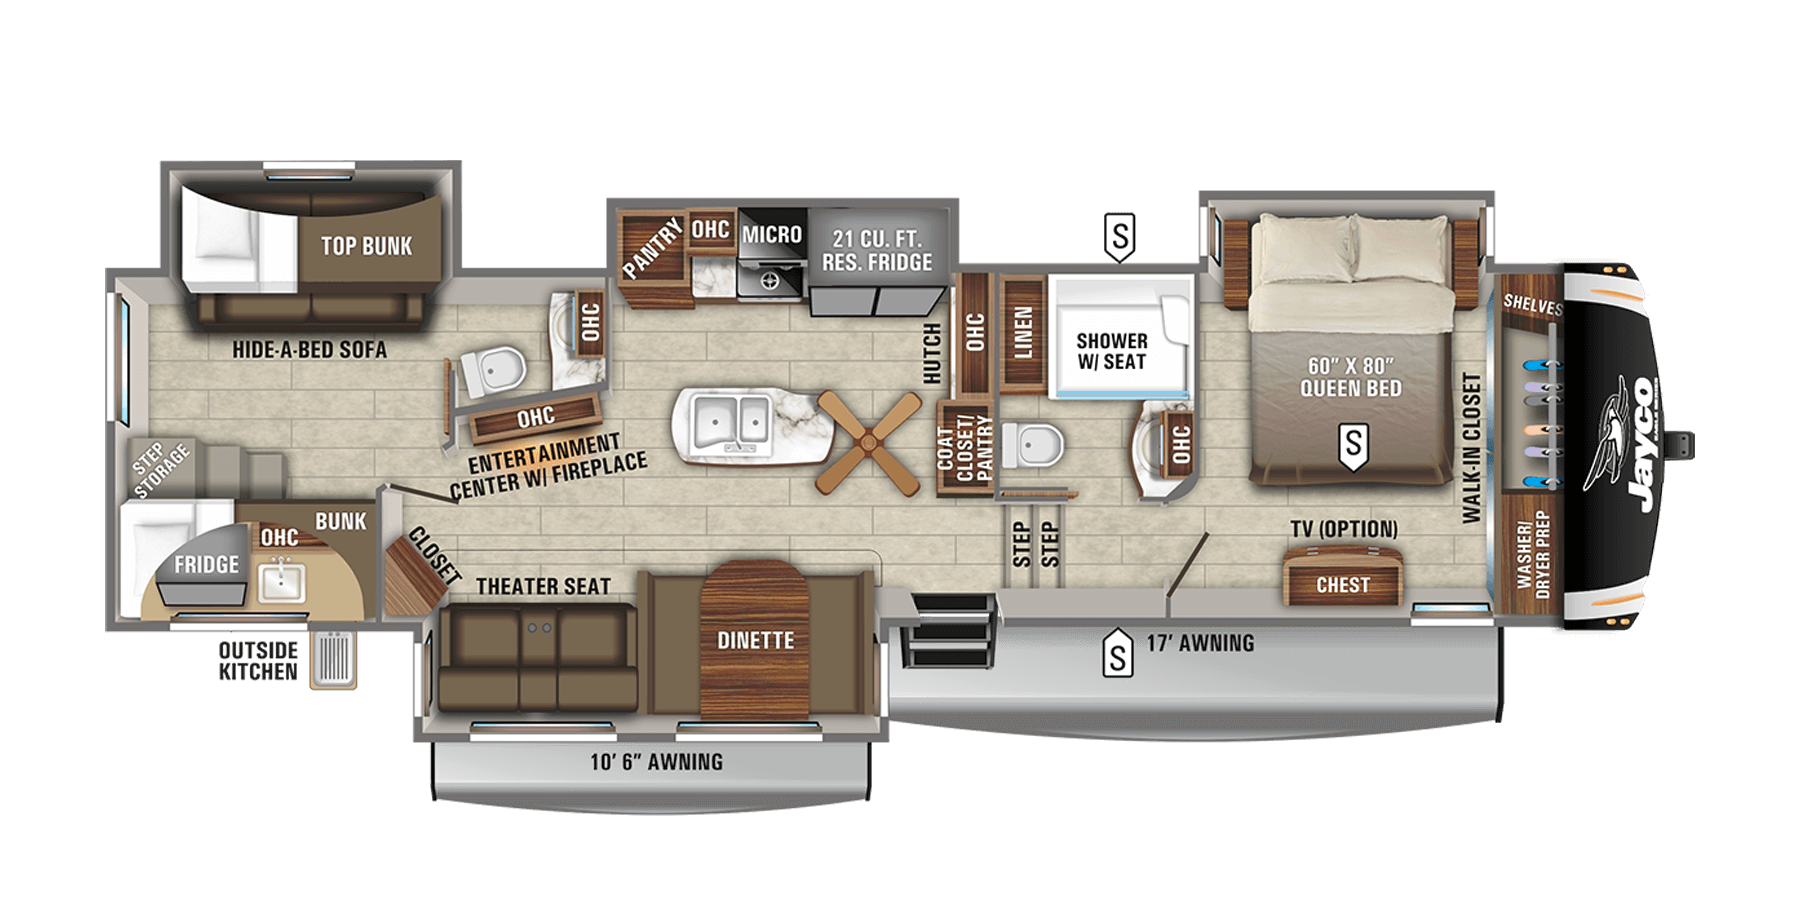 2021 Eagle Fifth Wheel Floorplans, Fifth Wheel With Bunk Beds And Outdoor Kitchen